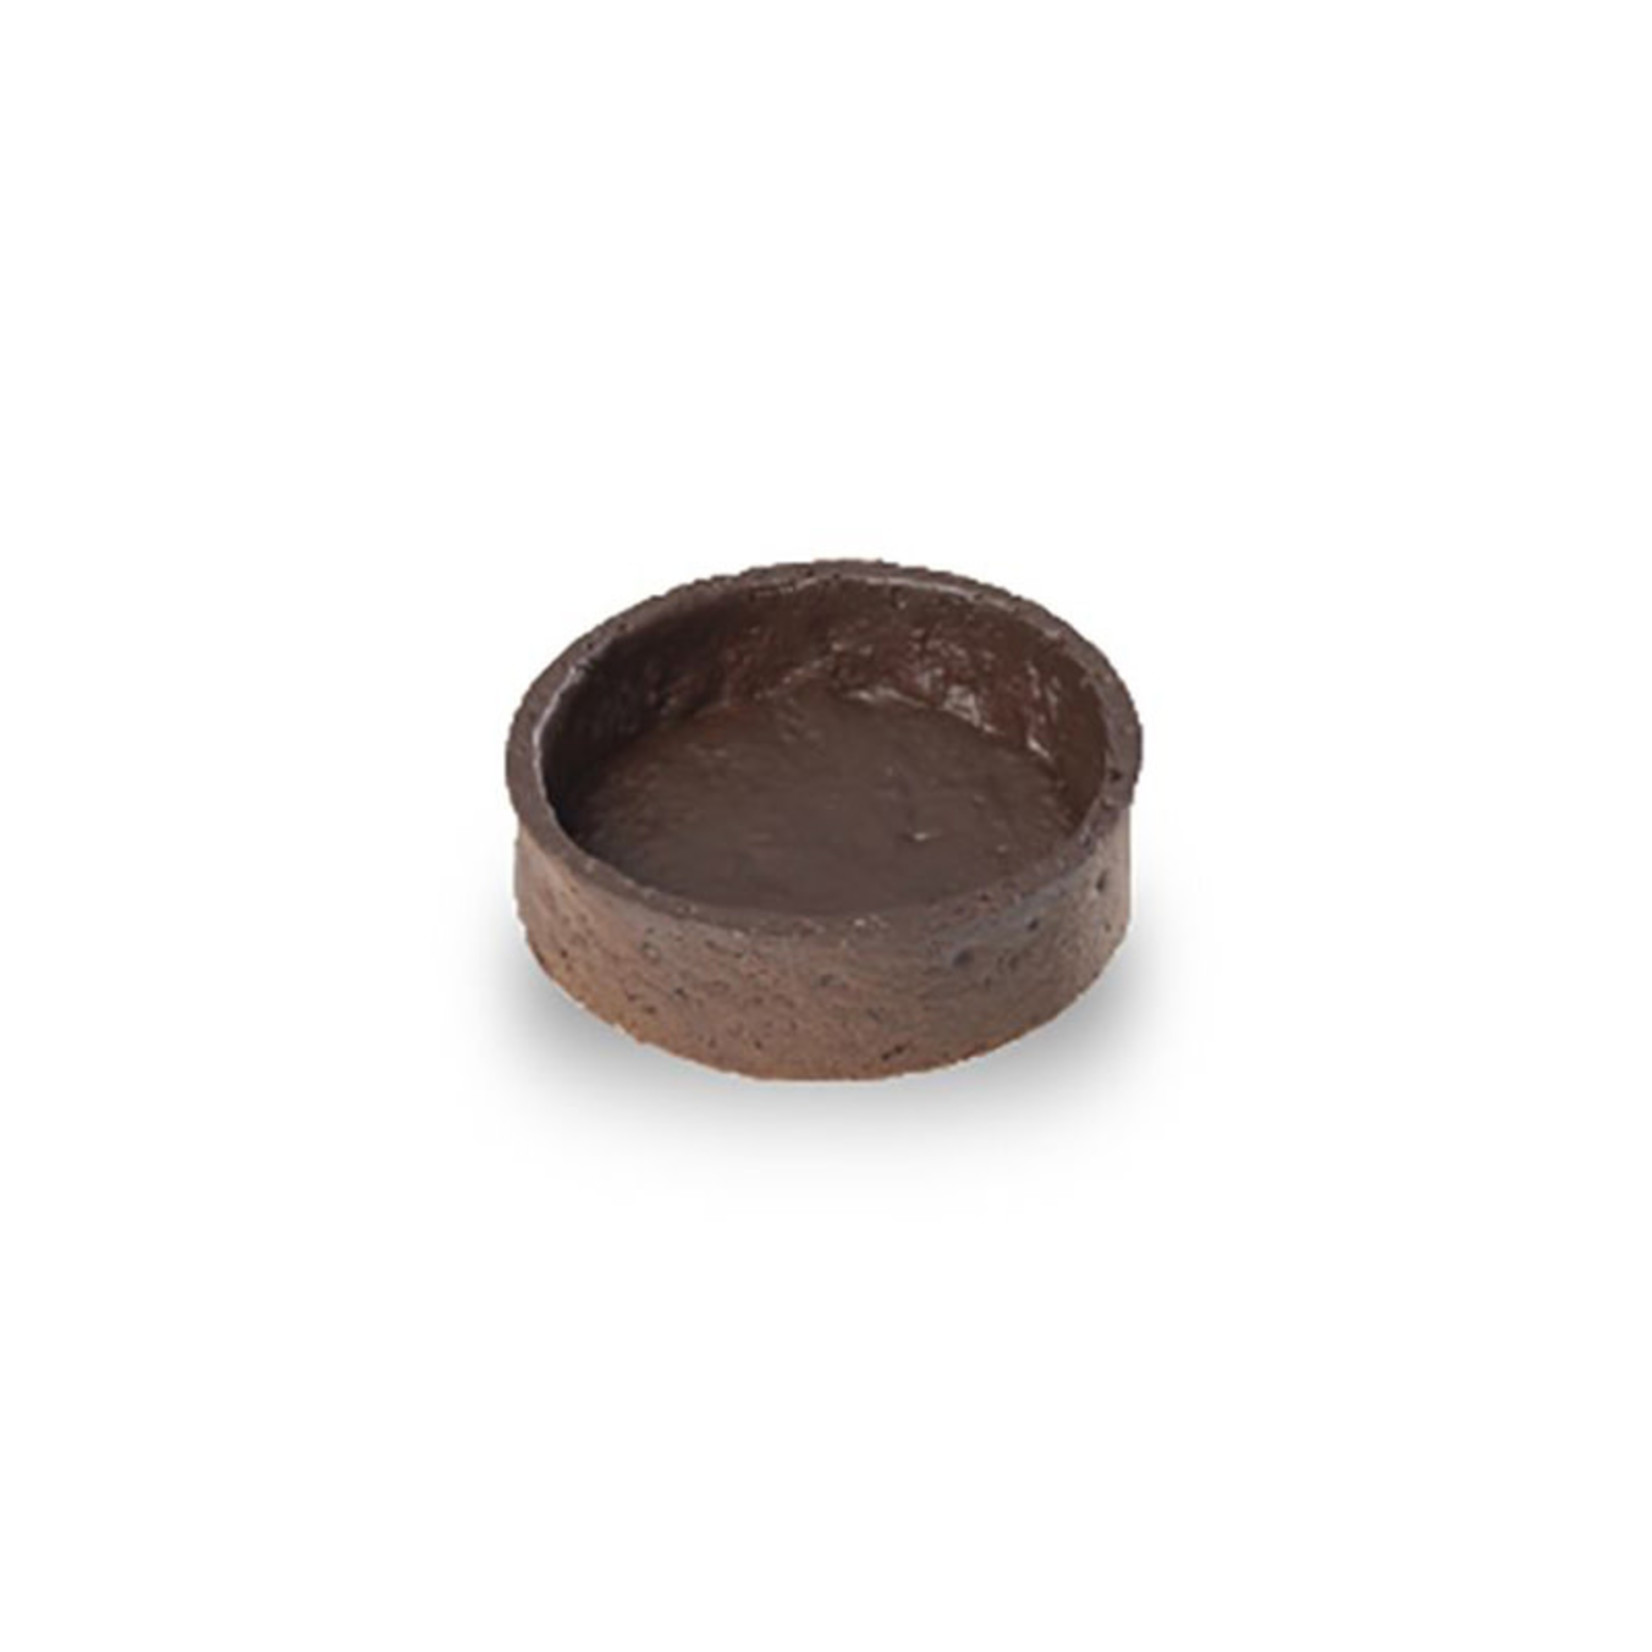 Le Chic Patissier Le Chic Patissier - Tart shell, Chocolate round - 3'' (60ct), 79039